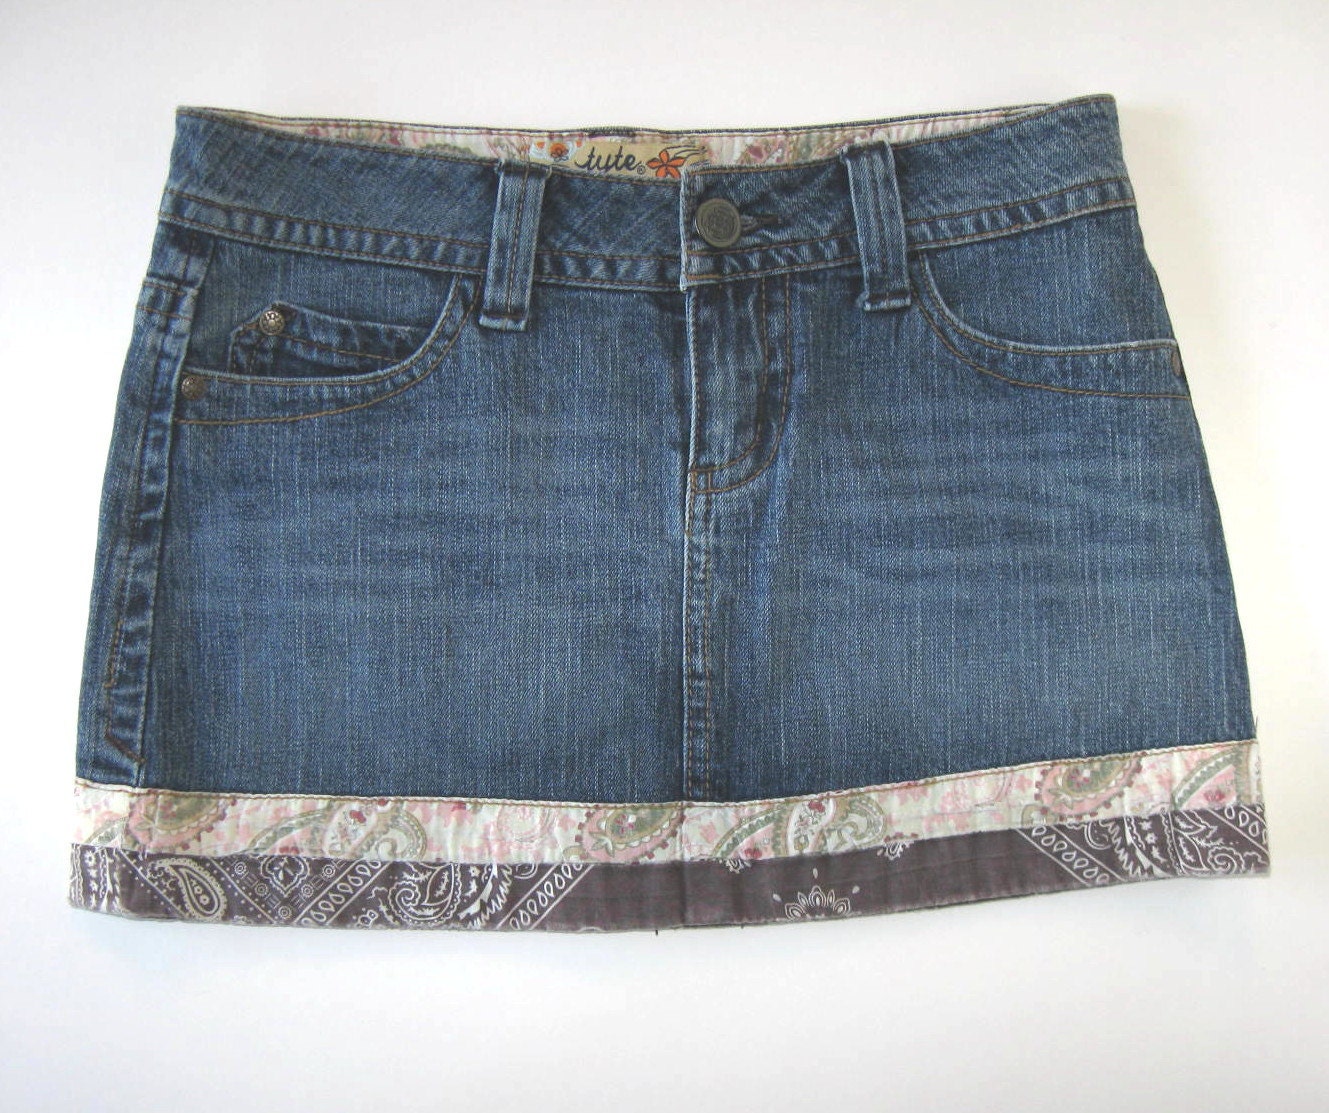 Denim Jeans Mini Skirt Woman's Clothing by jewelryandthings2